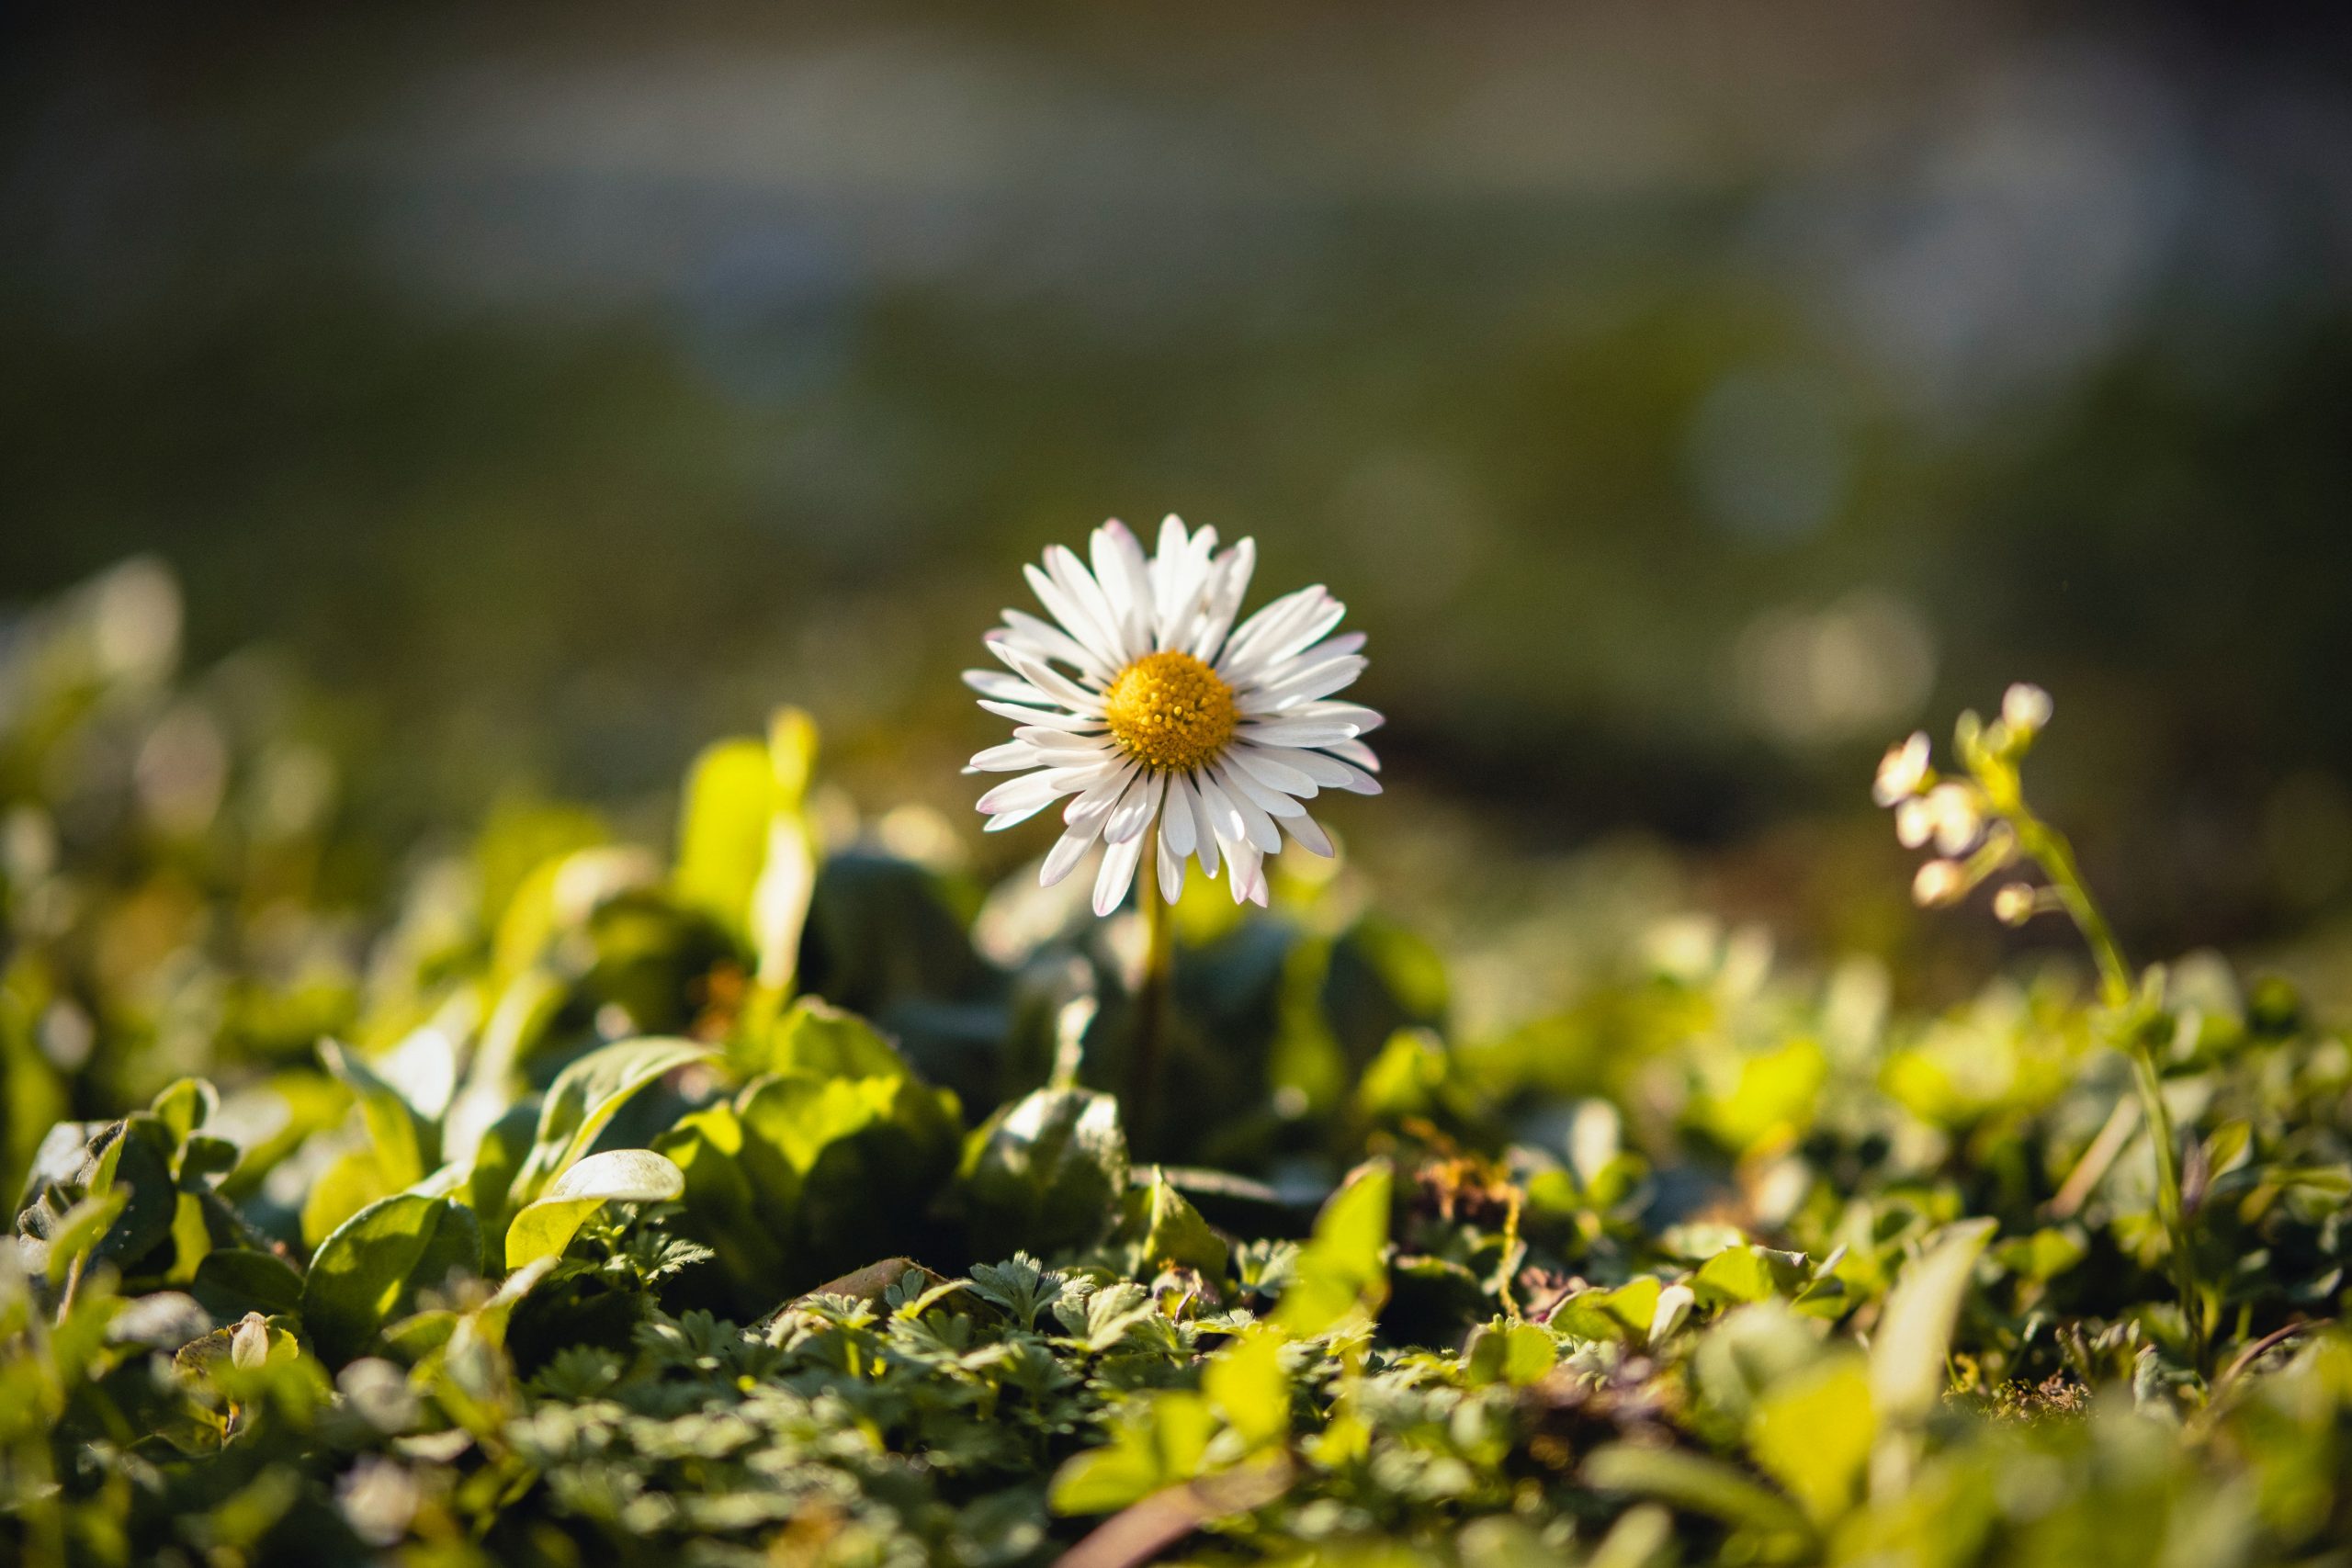 A close-up photograph of a single daisy flower with white petals and a golden centre. The daisy is surrounded by small green plants and happy sunshine.